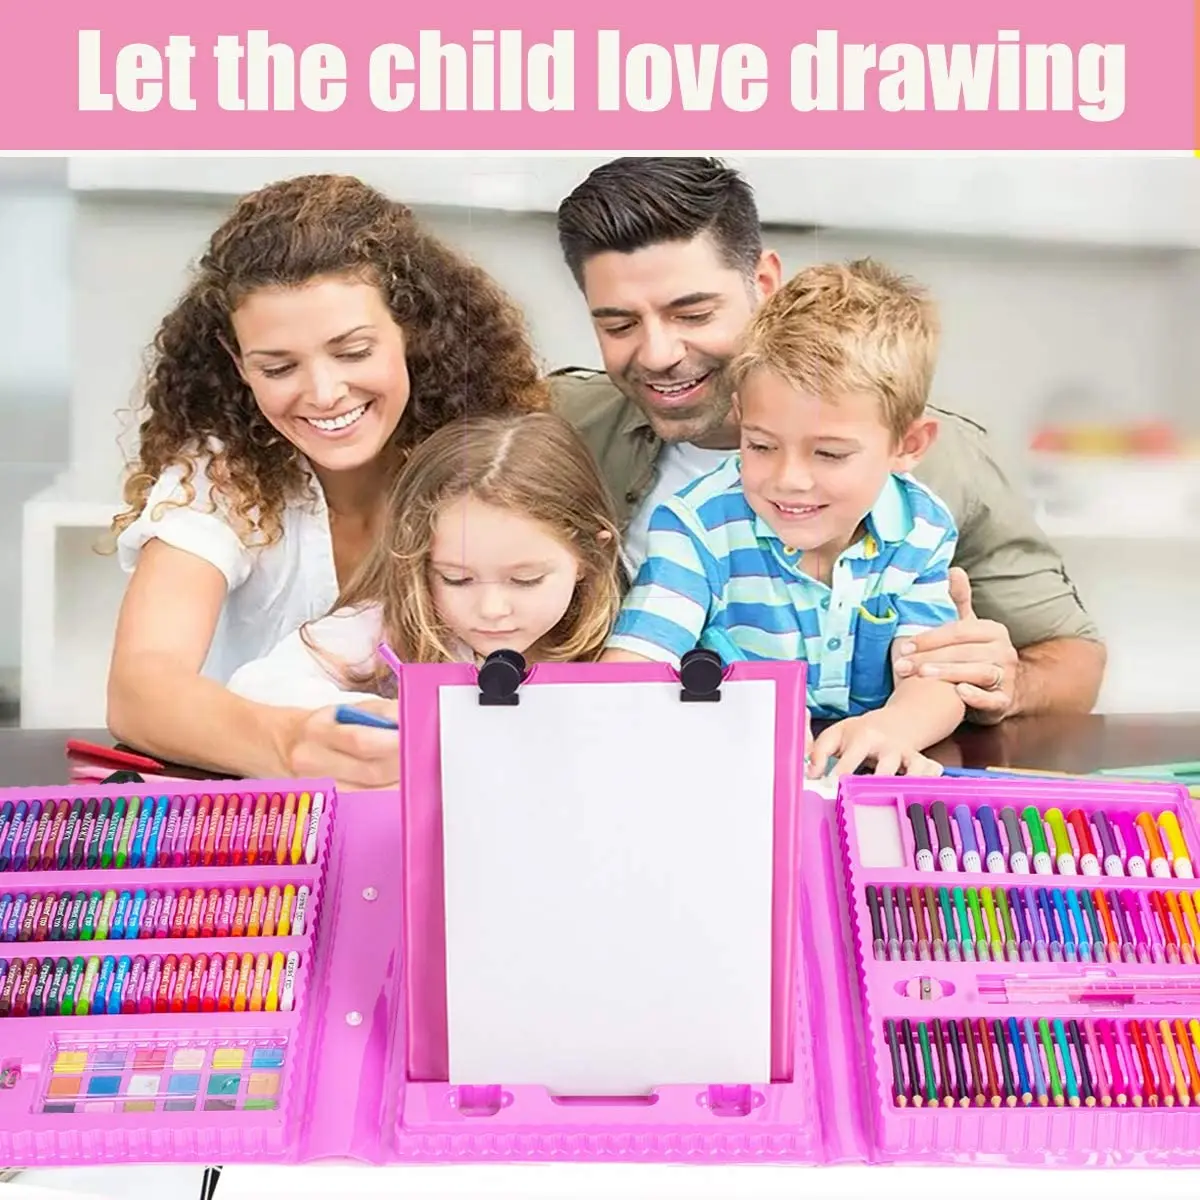 H & B 72PCS Drawing Supplies Sketching Set,Art Kit include Drawing &  Colored Pencils for Adults Artists Kids.Pro Art Sketch Supplies with,  drawing items - thirstymag.com